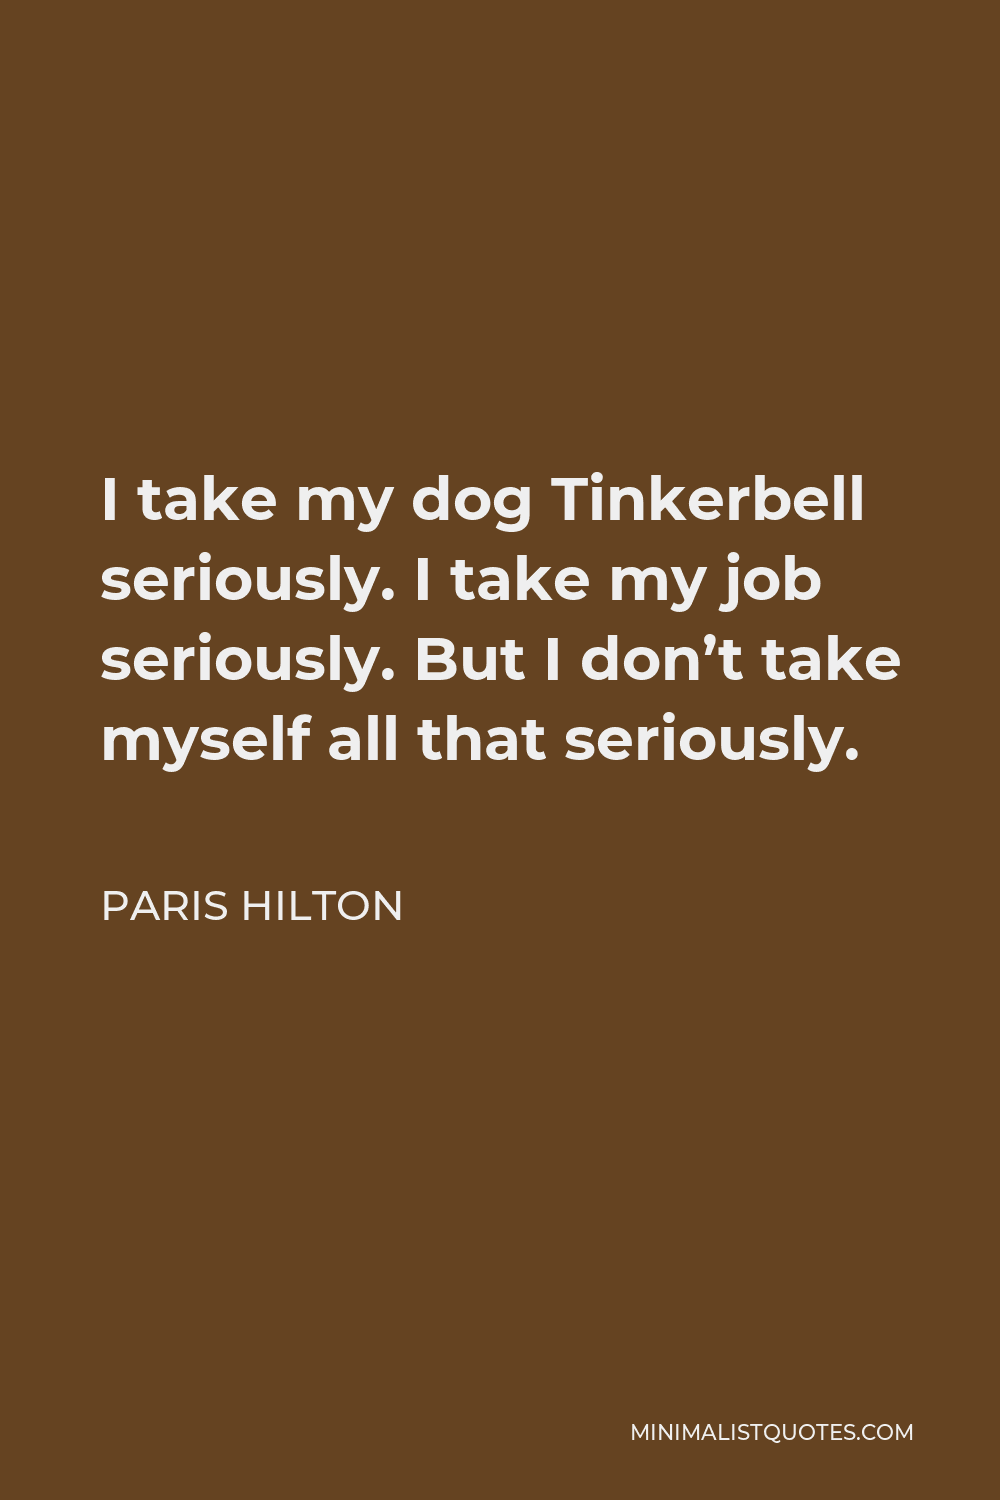 Paris Hilton Quote - I take my dog Tinkerbell seriously. I take my job seriously. But I don’t take myself all that seriously.